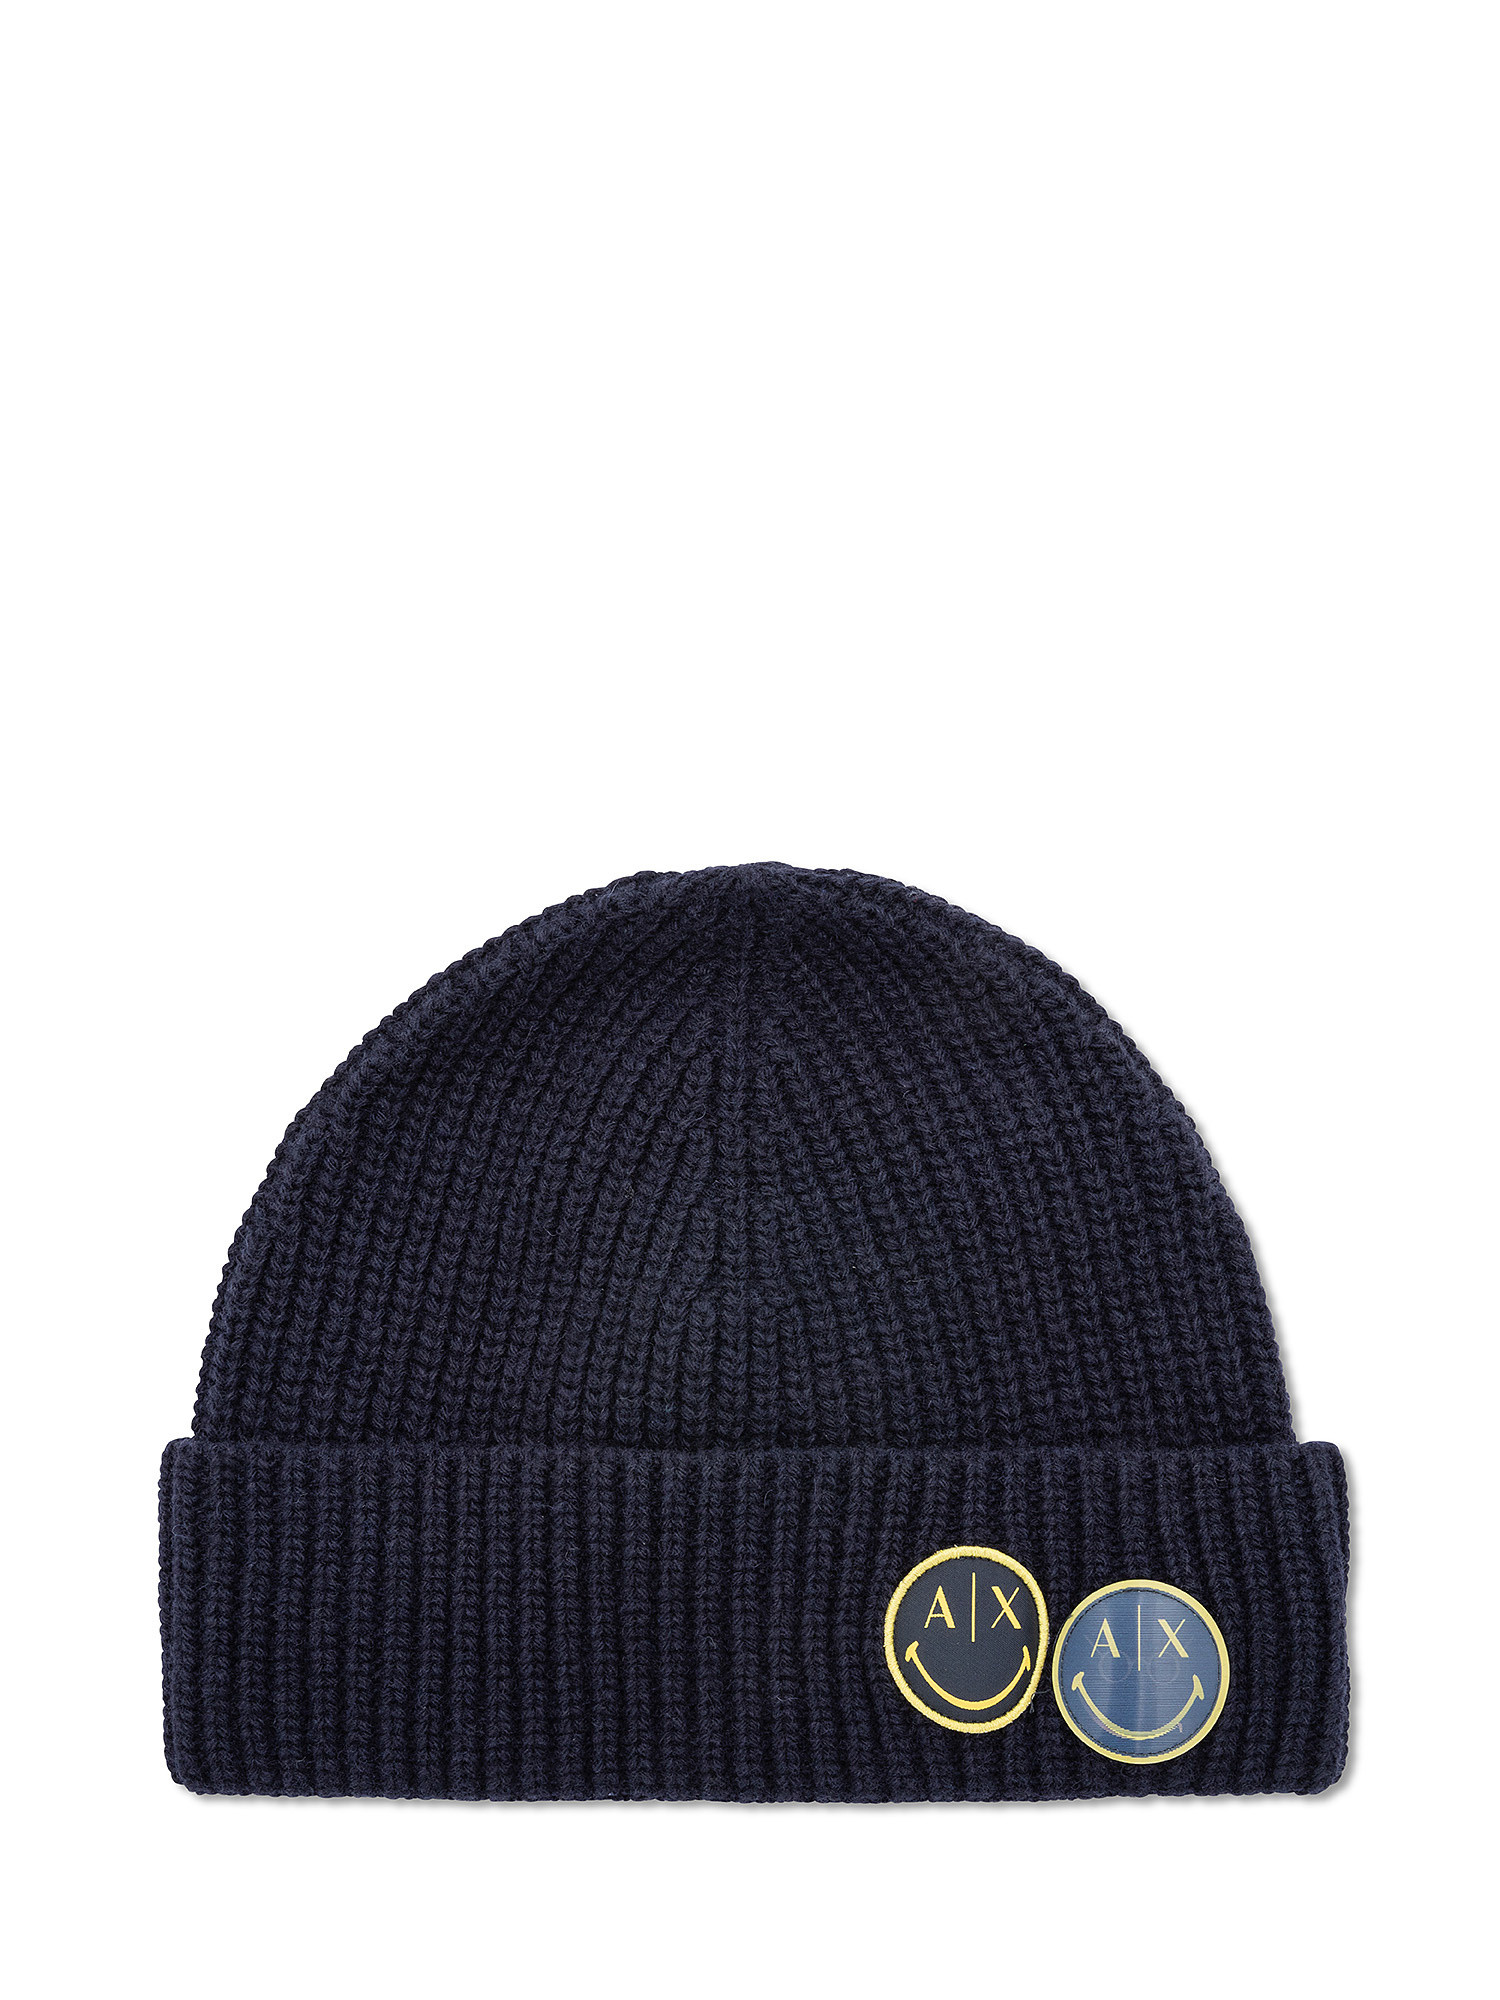 Armani Exchange - Beanie hat with applications, Dark Blue, large image number 0